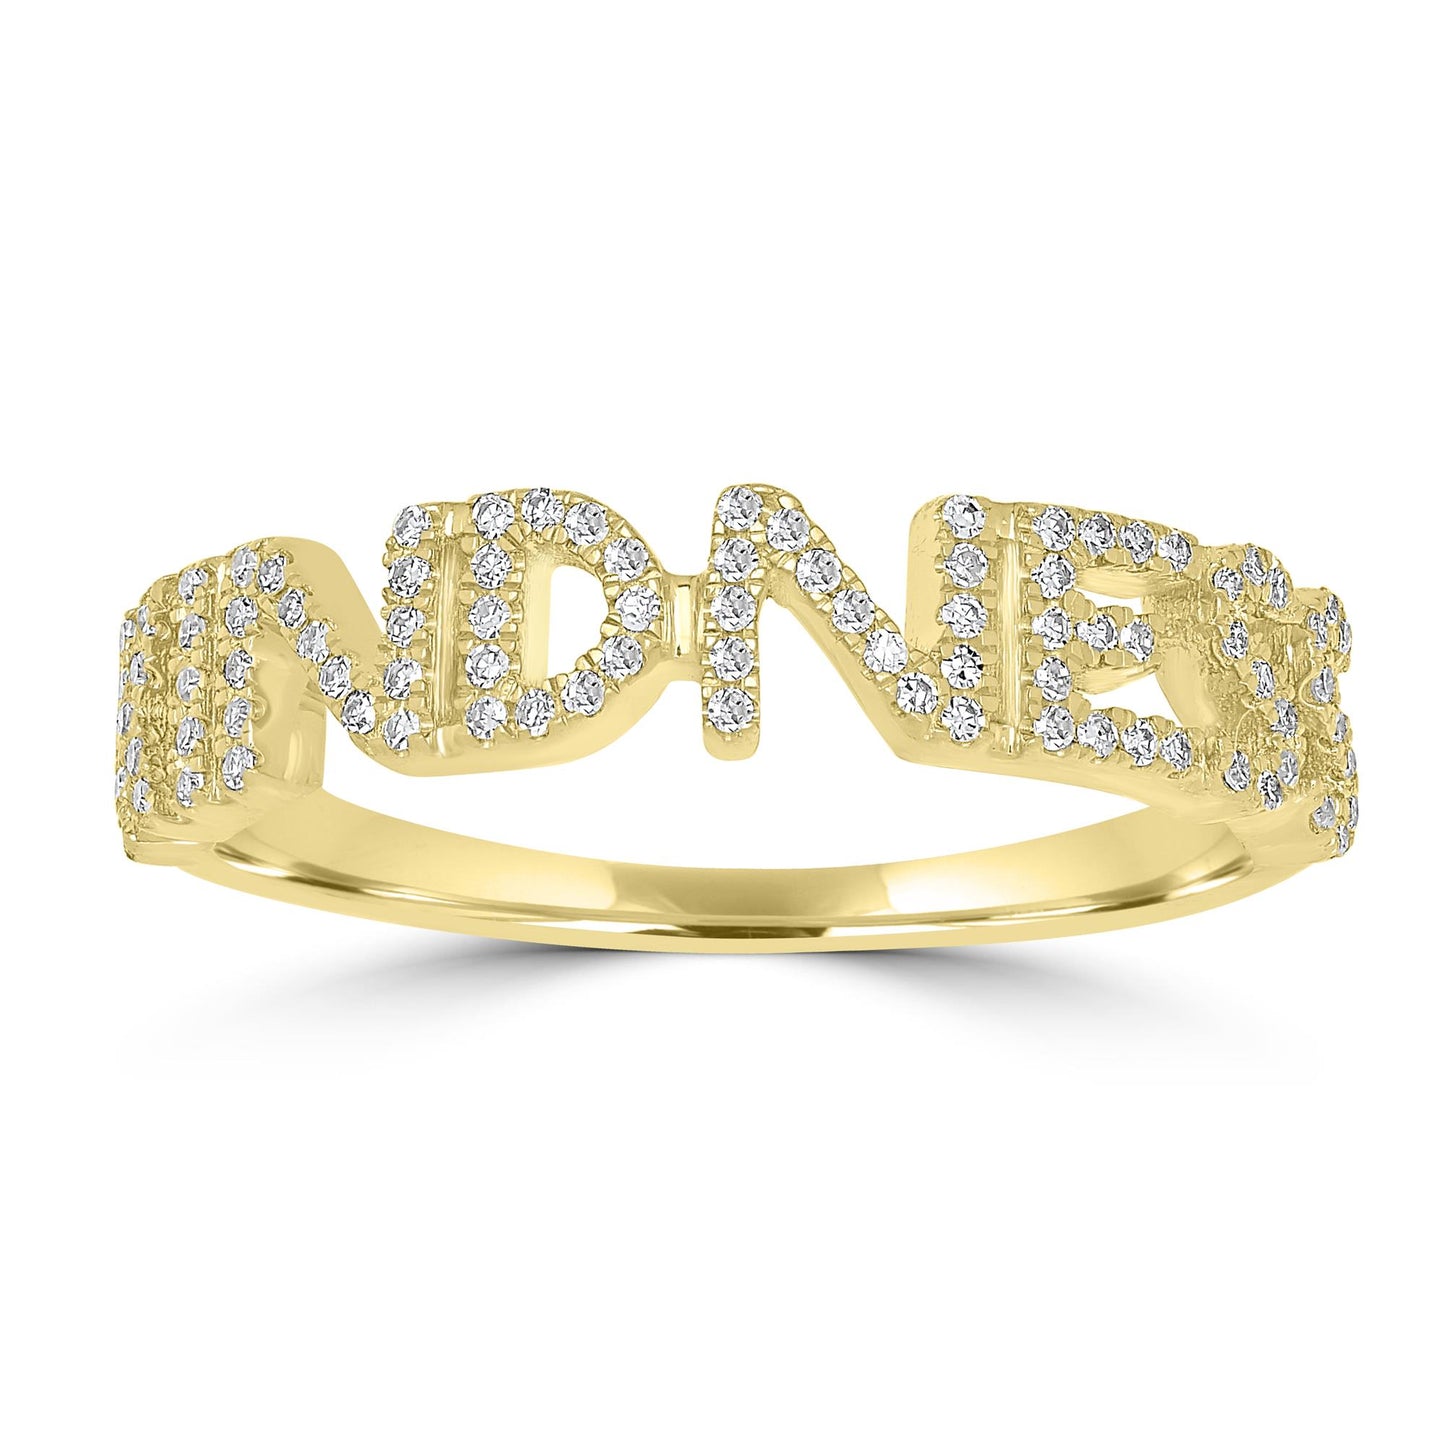 14K Yellow Gold "Kindness" Ring with Pavé Diamonds